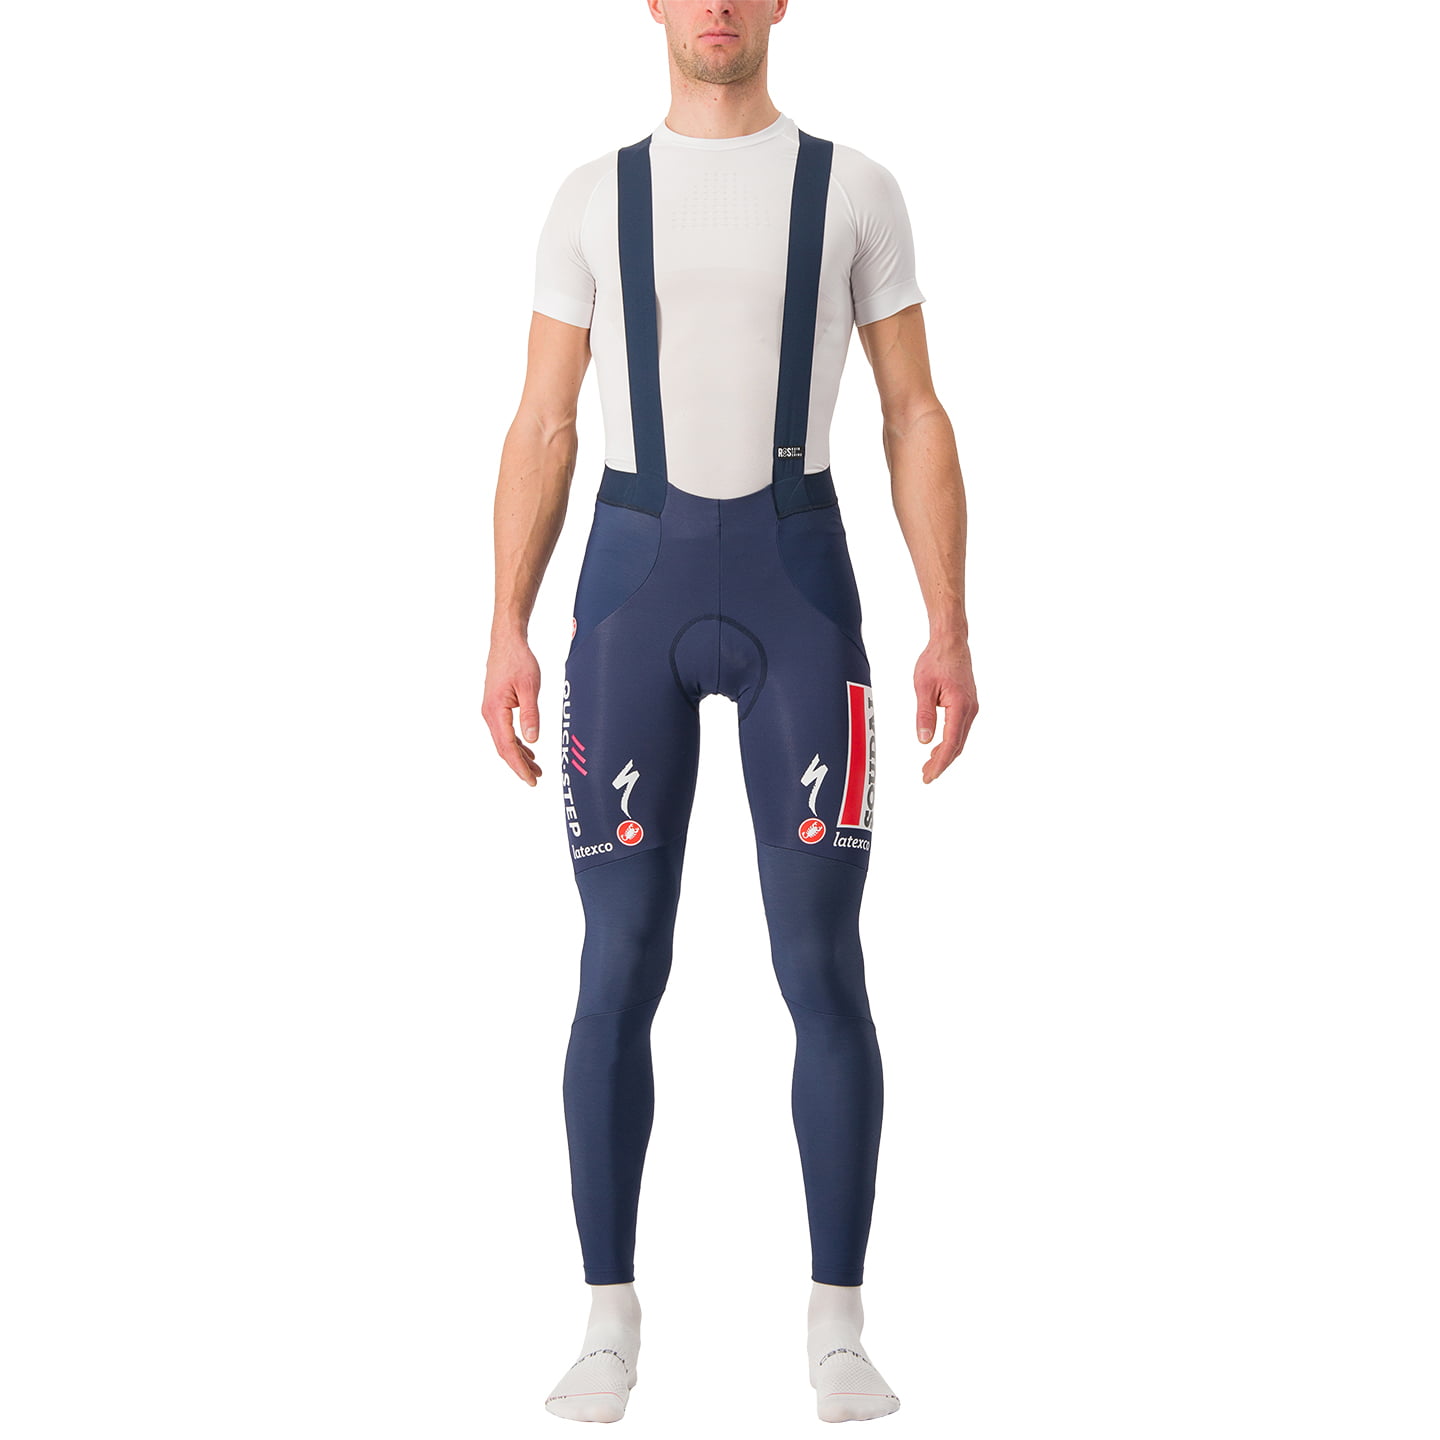 SOUDAL QUICK-STEP 2023 Bib Tights, for men, size XL, Cycle trousers, Cycle clothing